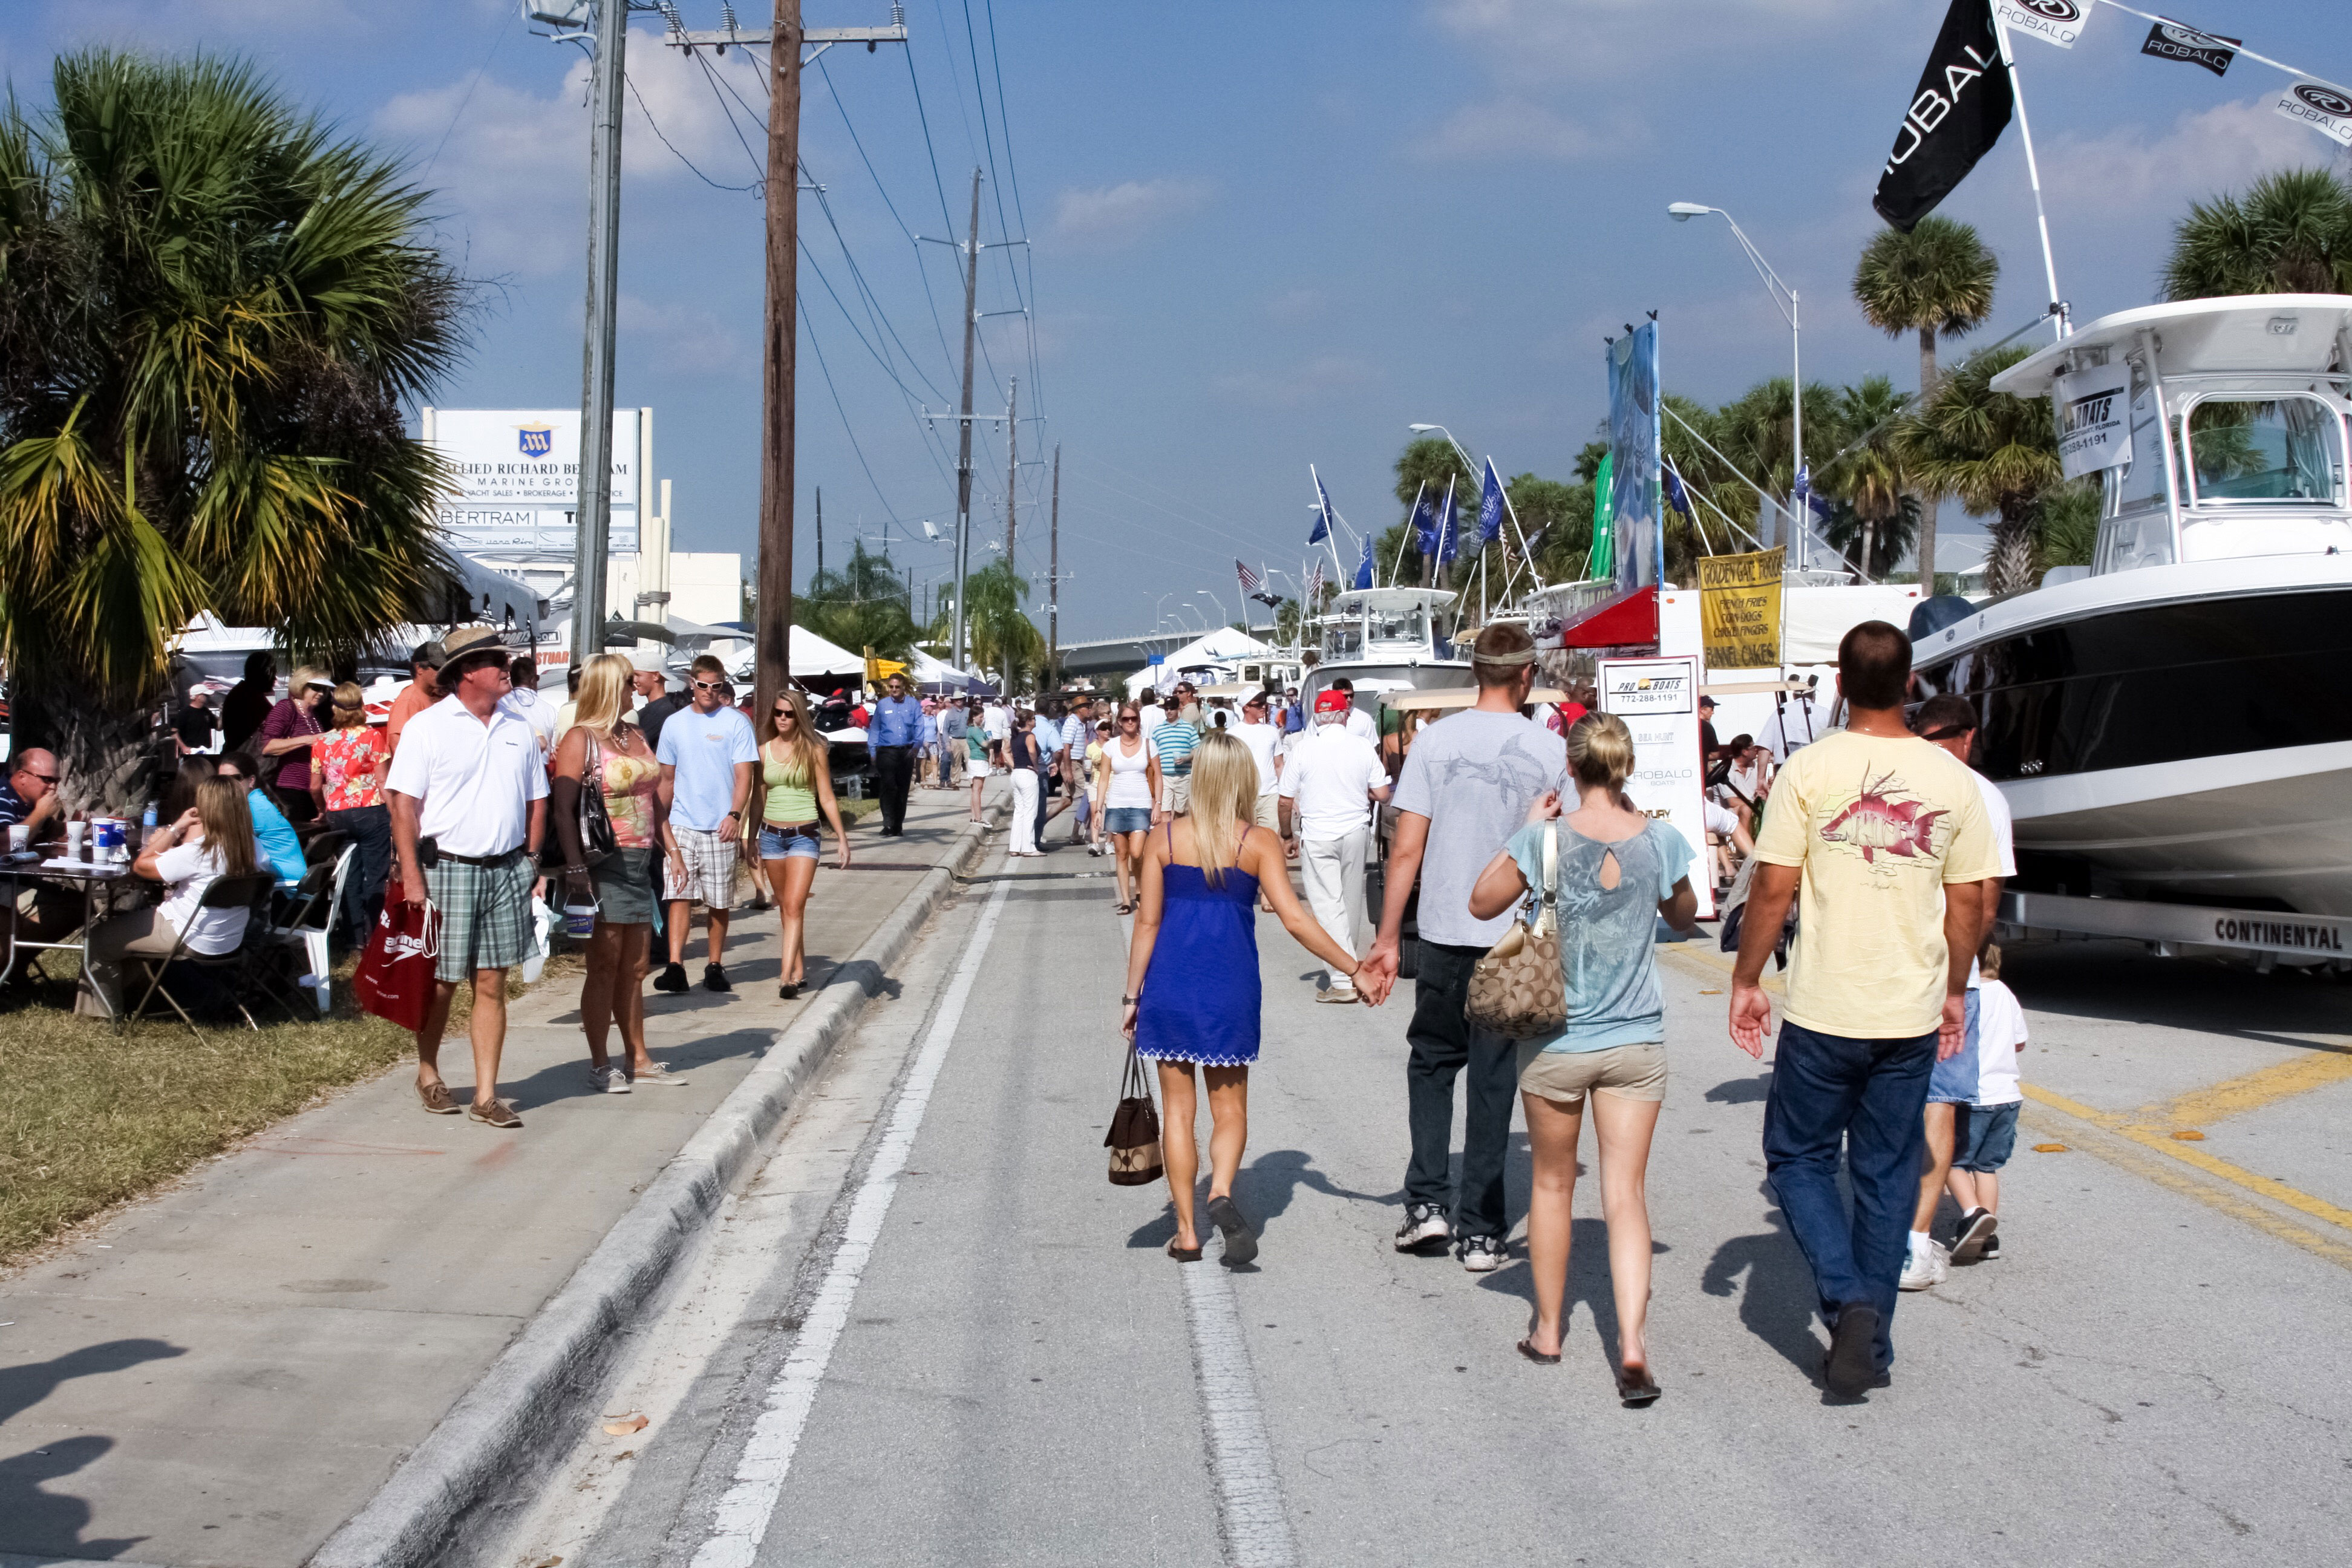 Stuart Boat Show -Crowds in the Street - Allsports Productions